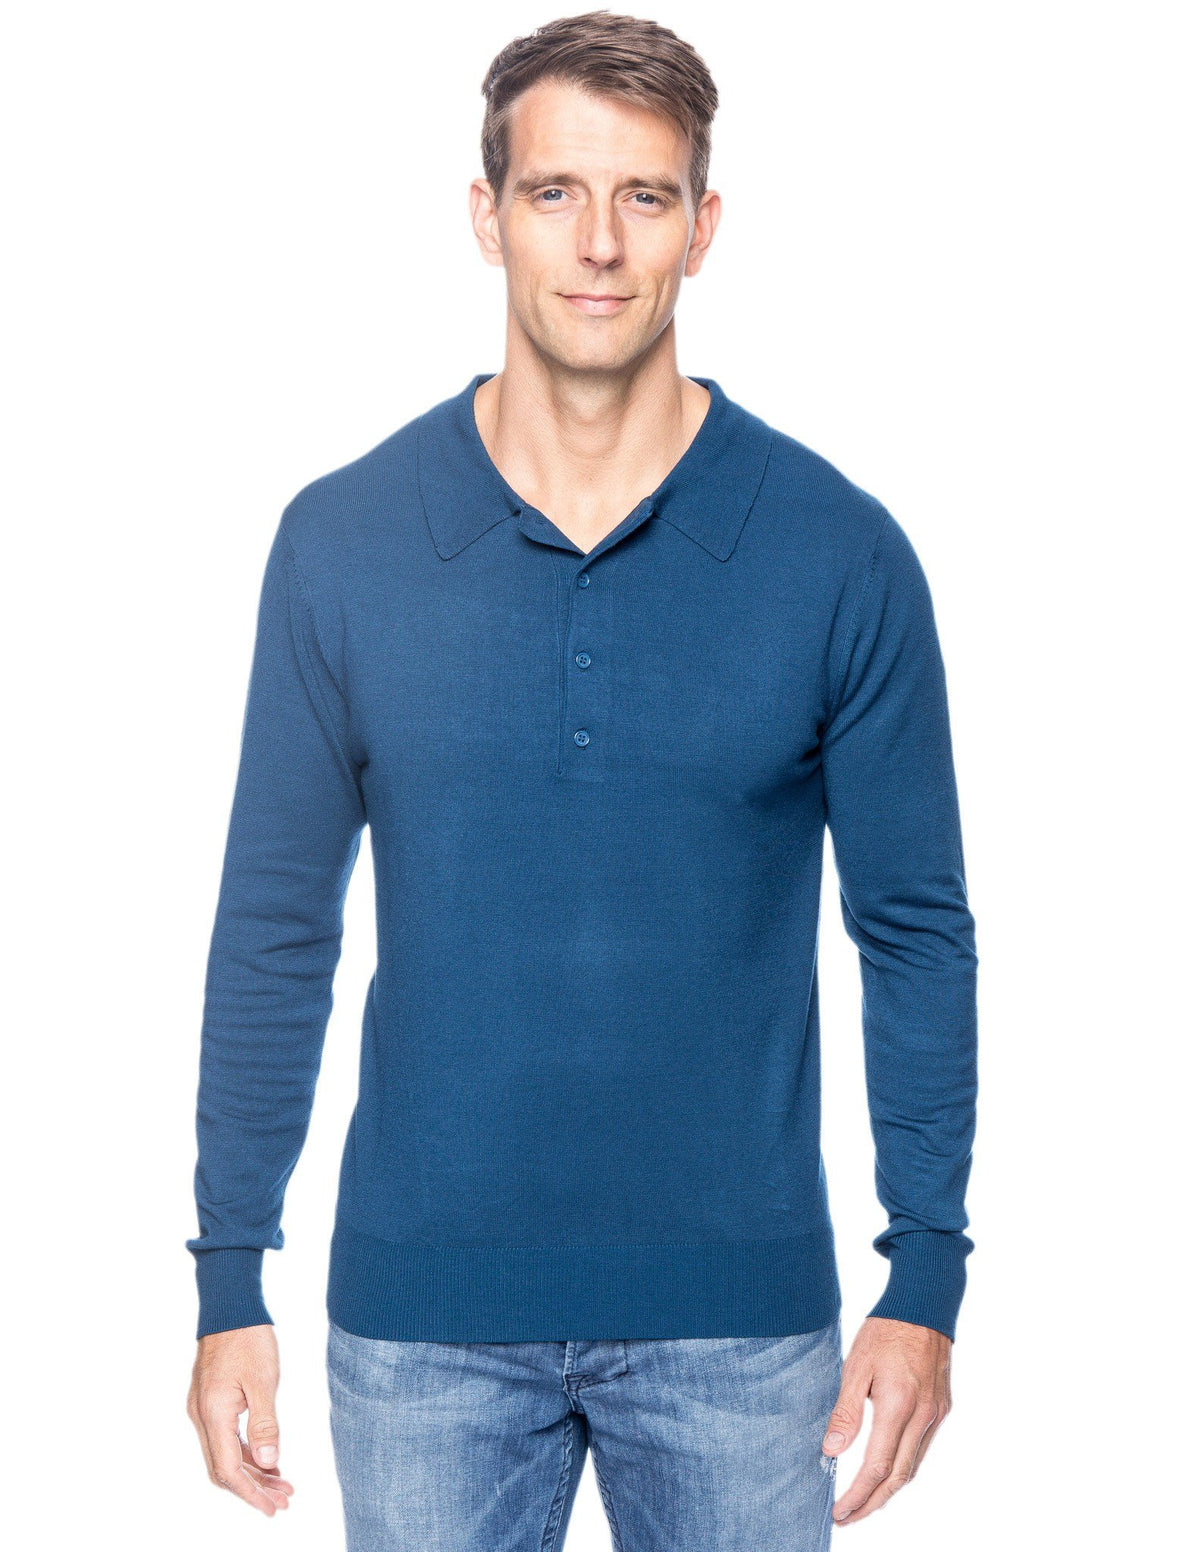 Men's Classic Knit Long Sleeve Polo Sweater - Teal